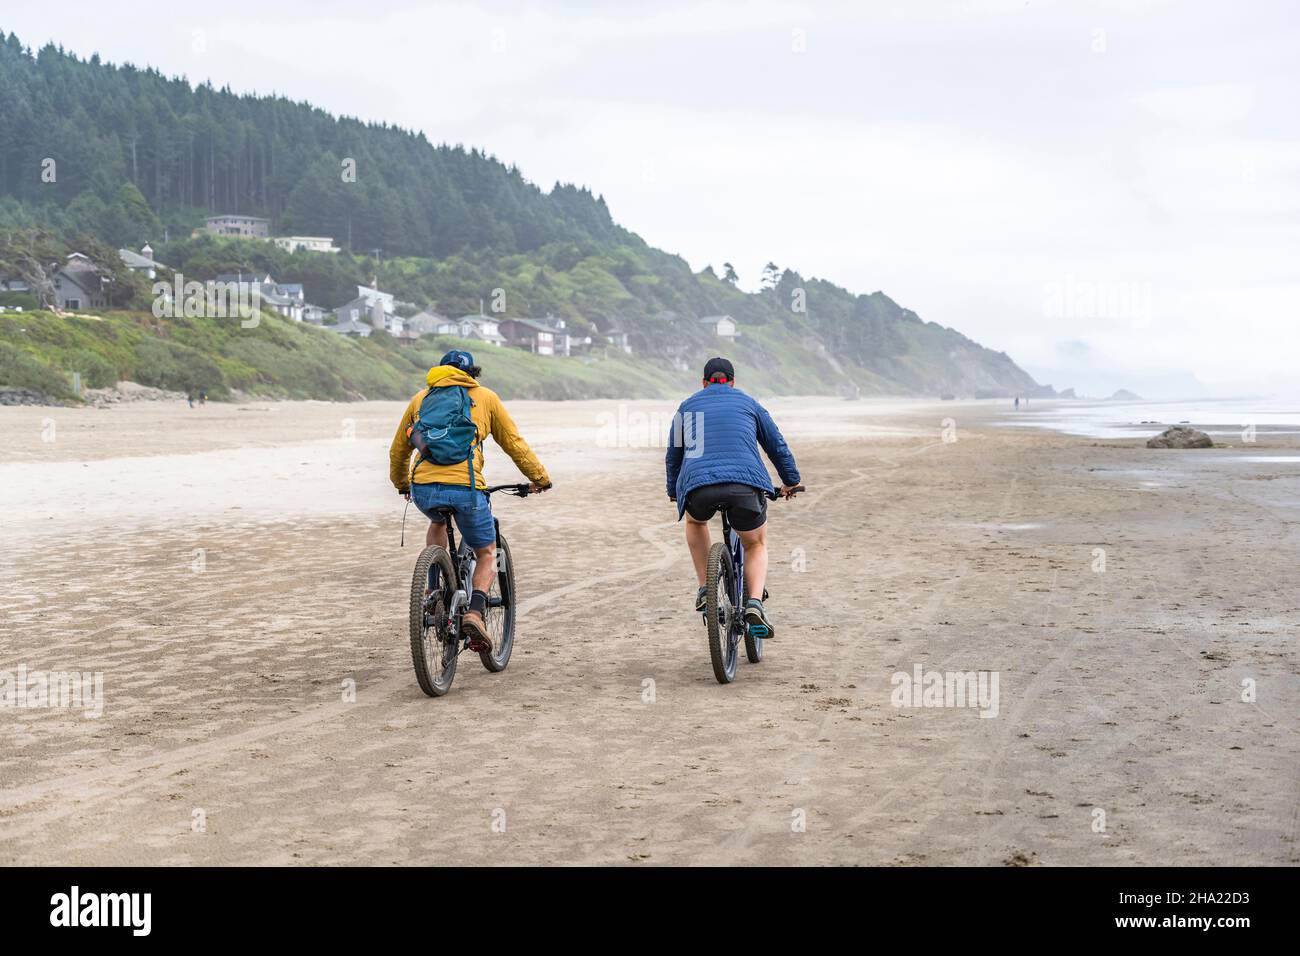 Two amateur men in in warm clothes travel side by side on the mountain bicycles along the foggy Northwest Pacific Ocean preferring an active healthy l Stock Photo